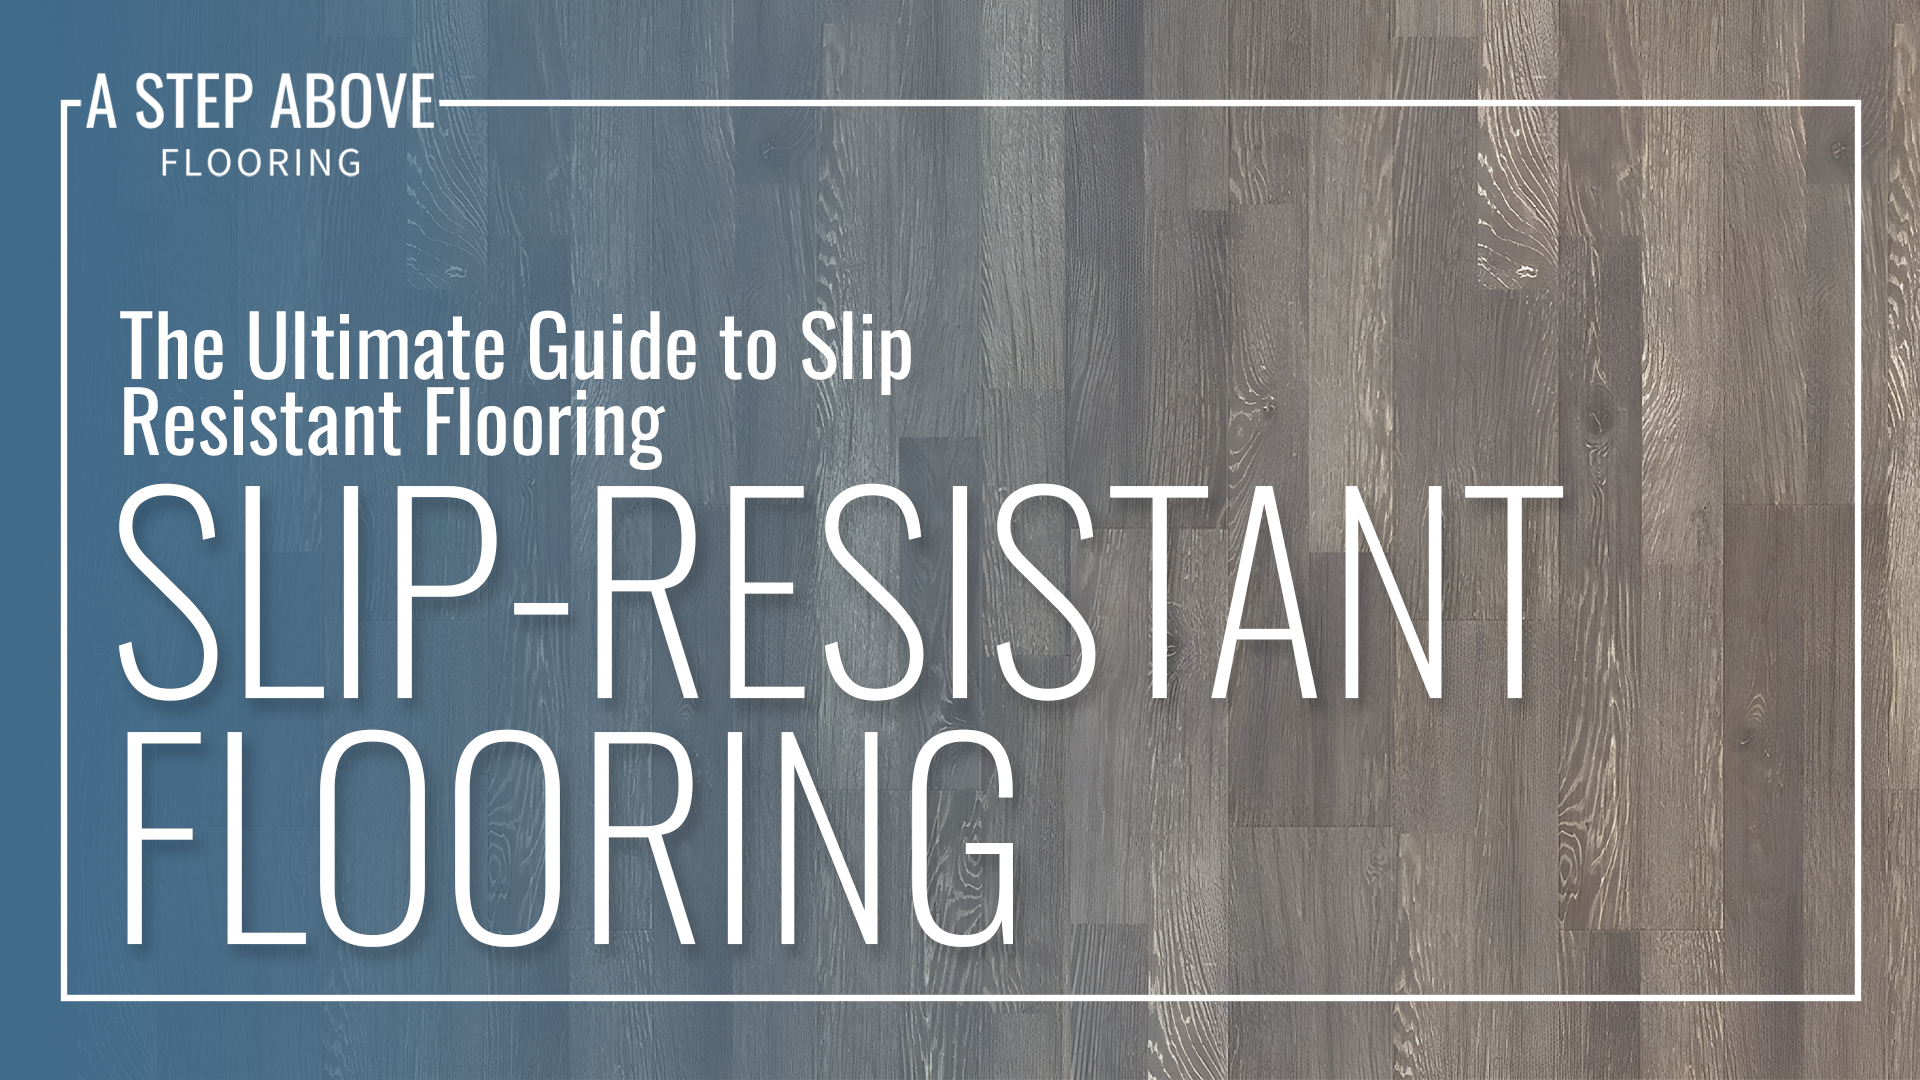 The Ultimate Guide to Slip-Resistant Flooring